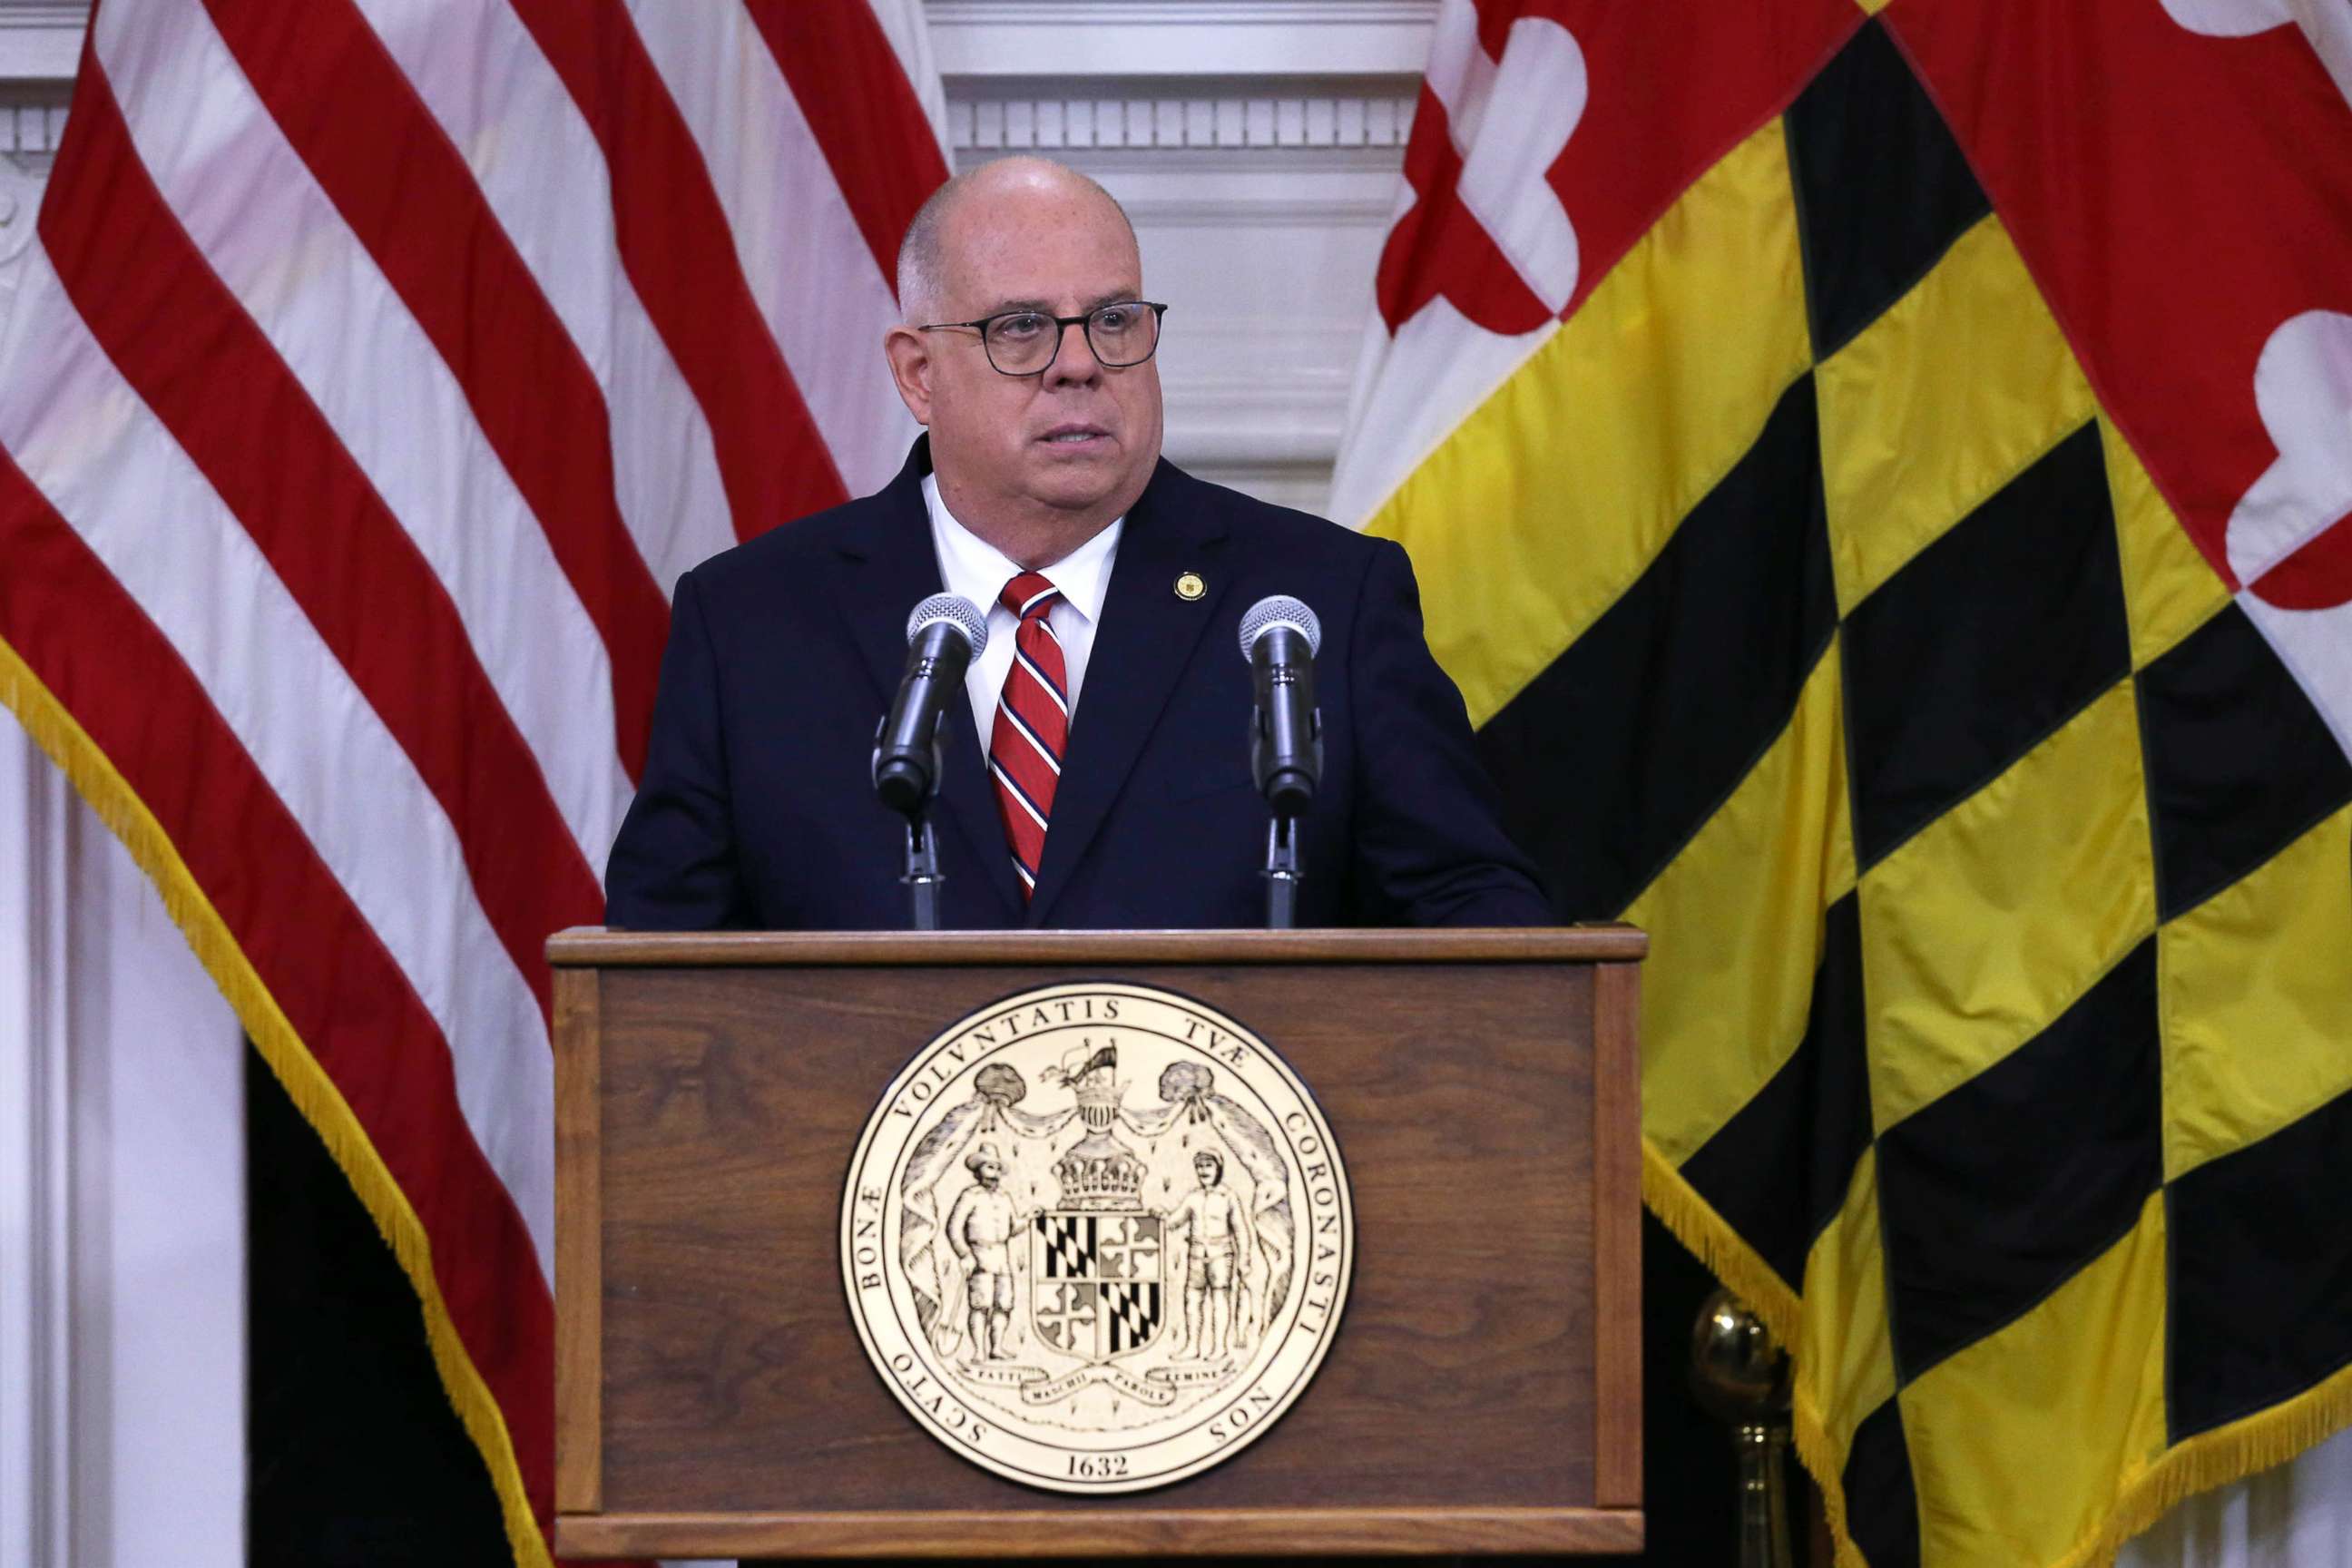 PHOTO: In this June 9, 2022, file photo, Governor Larry Hogan speaks at a press conference at the Maryland State House in Annapolis, Md.